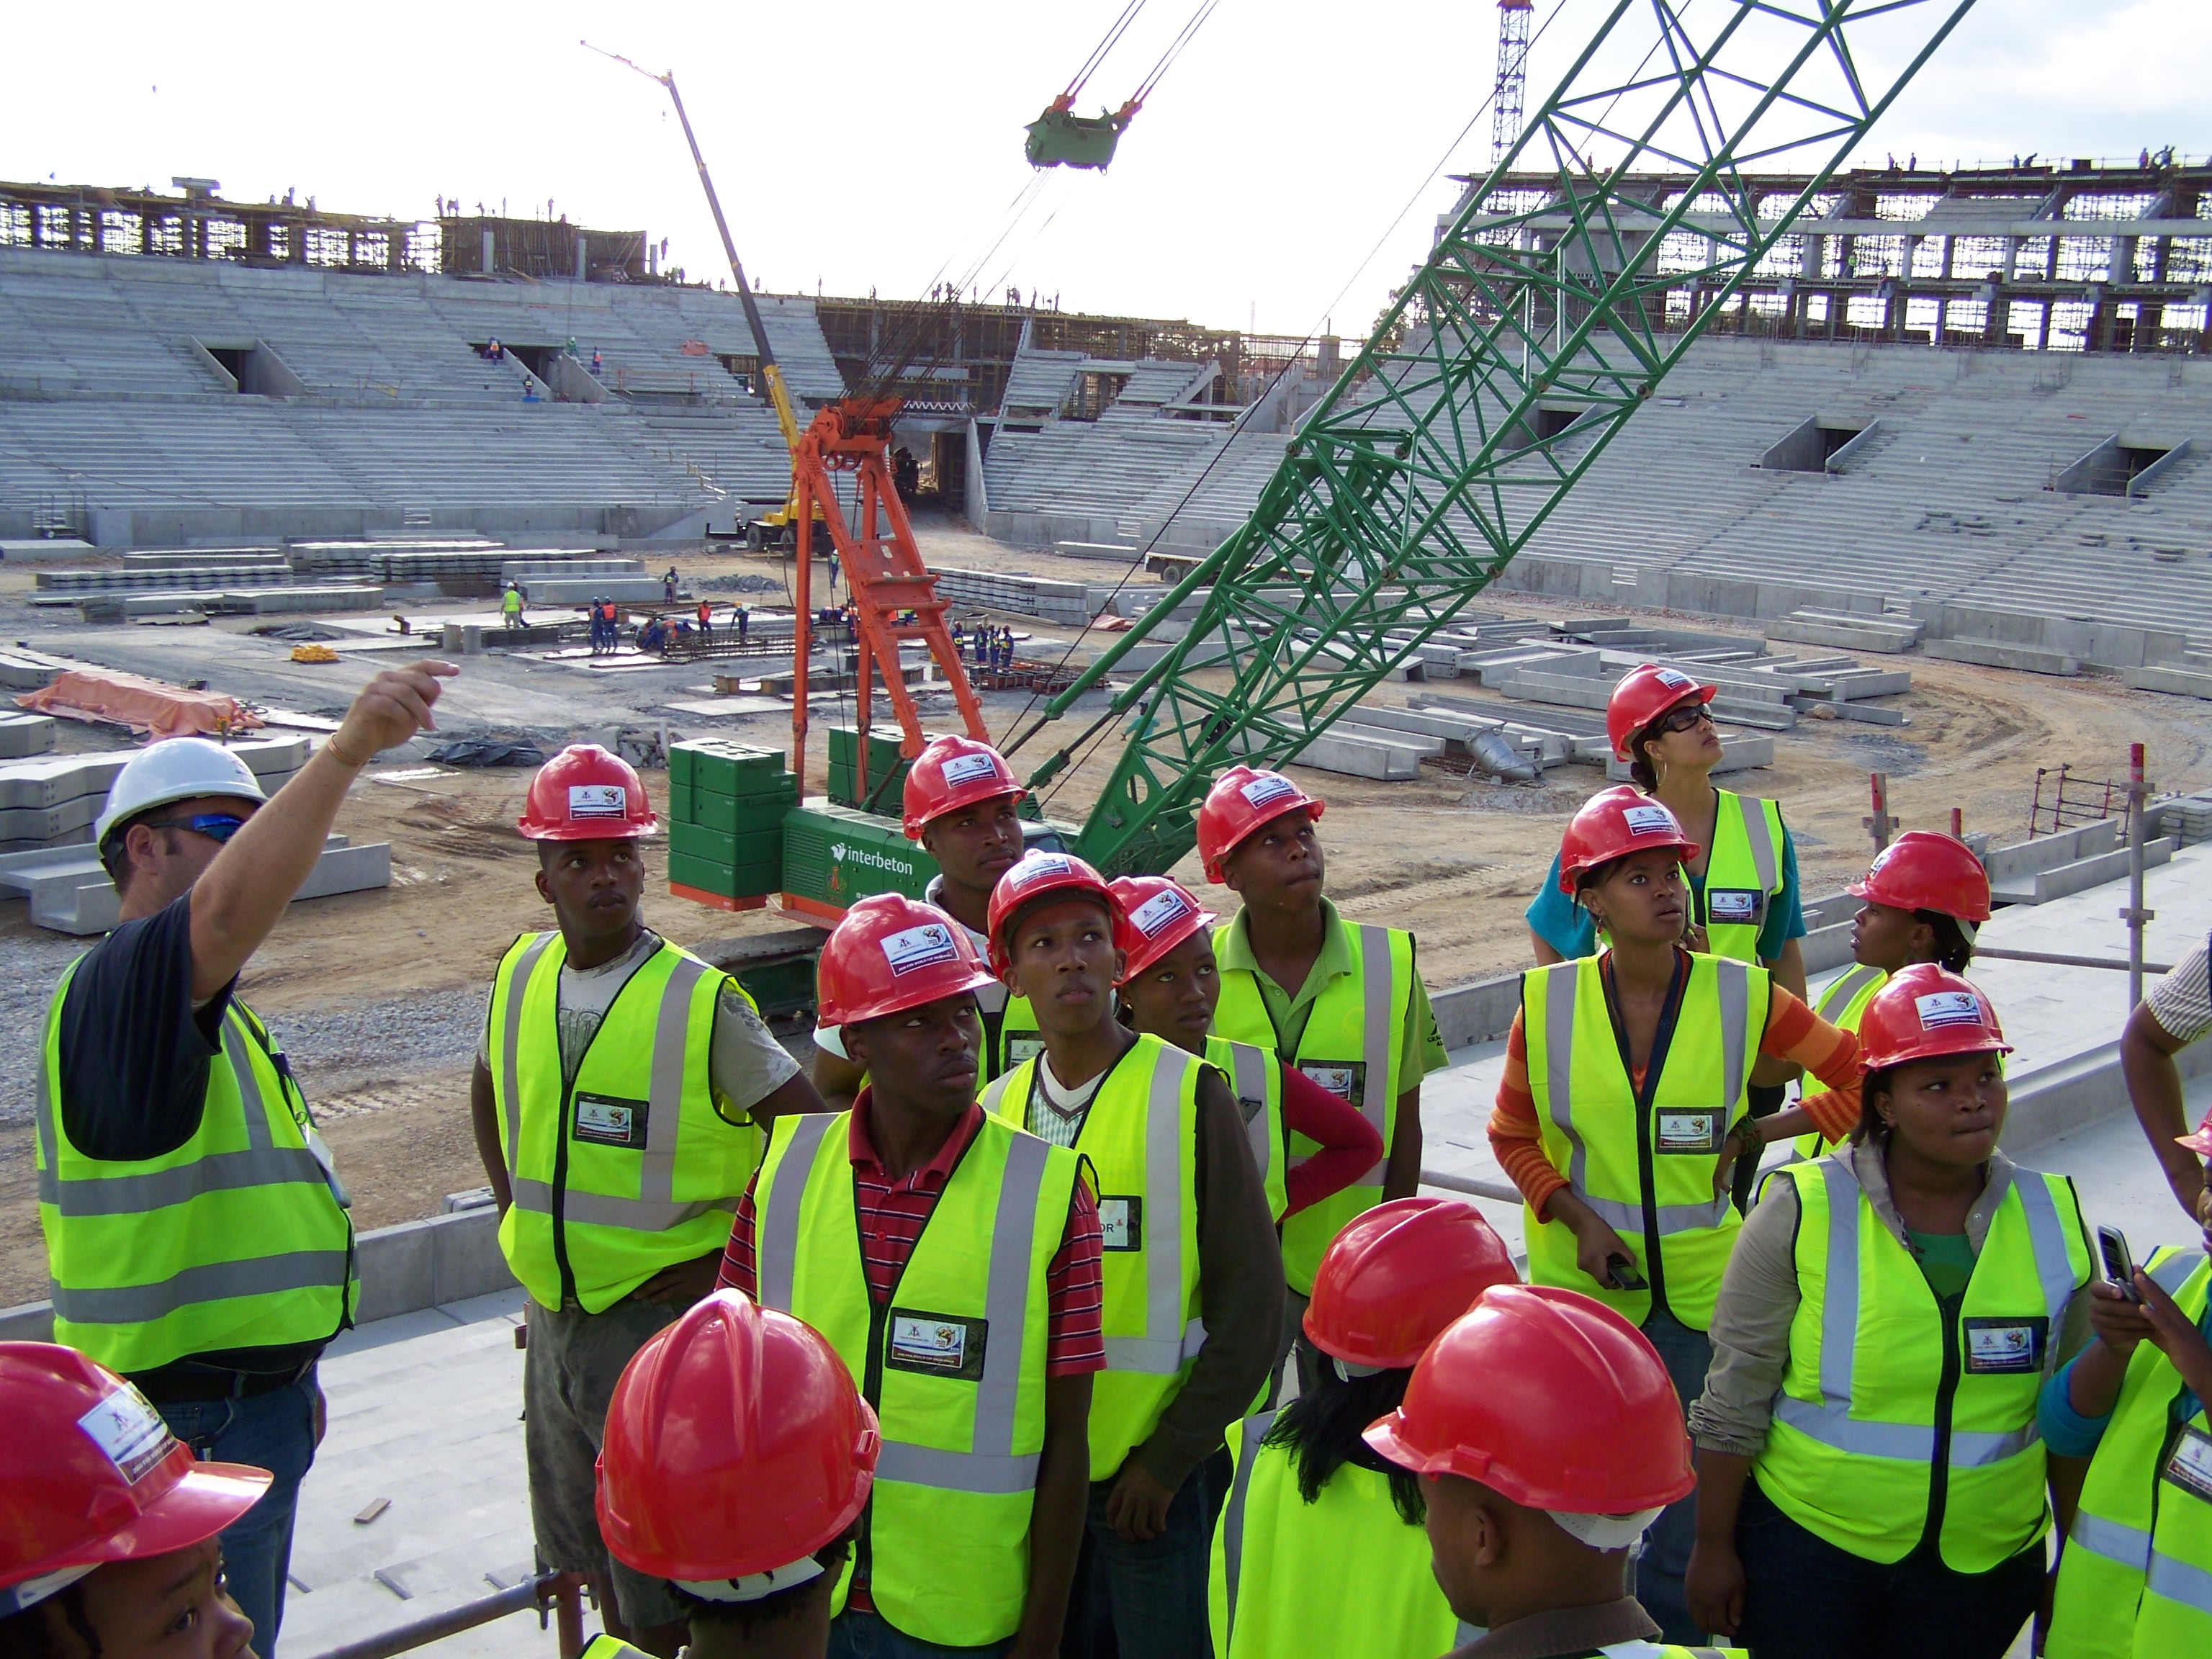 Eddie, a safety officer on site explains how the stadium is built